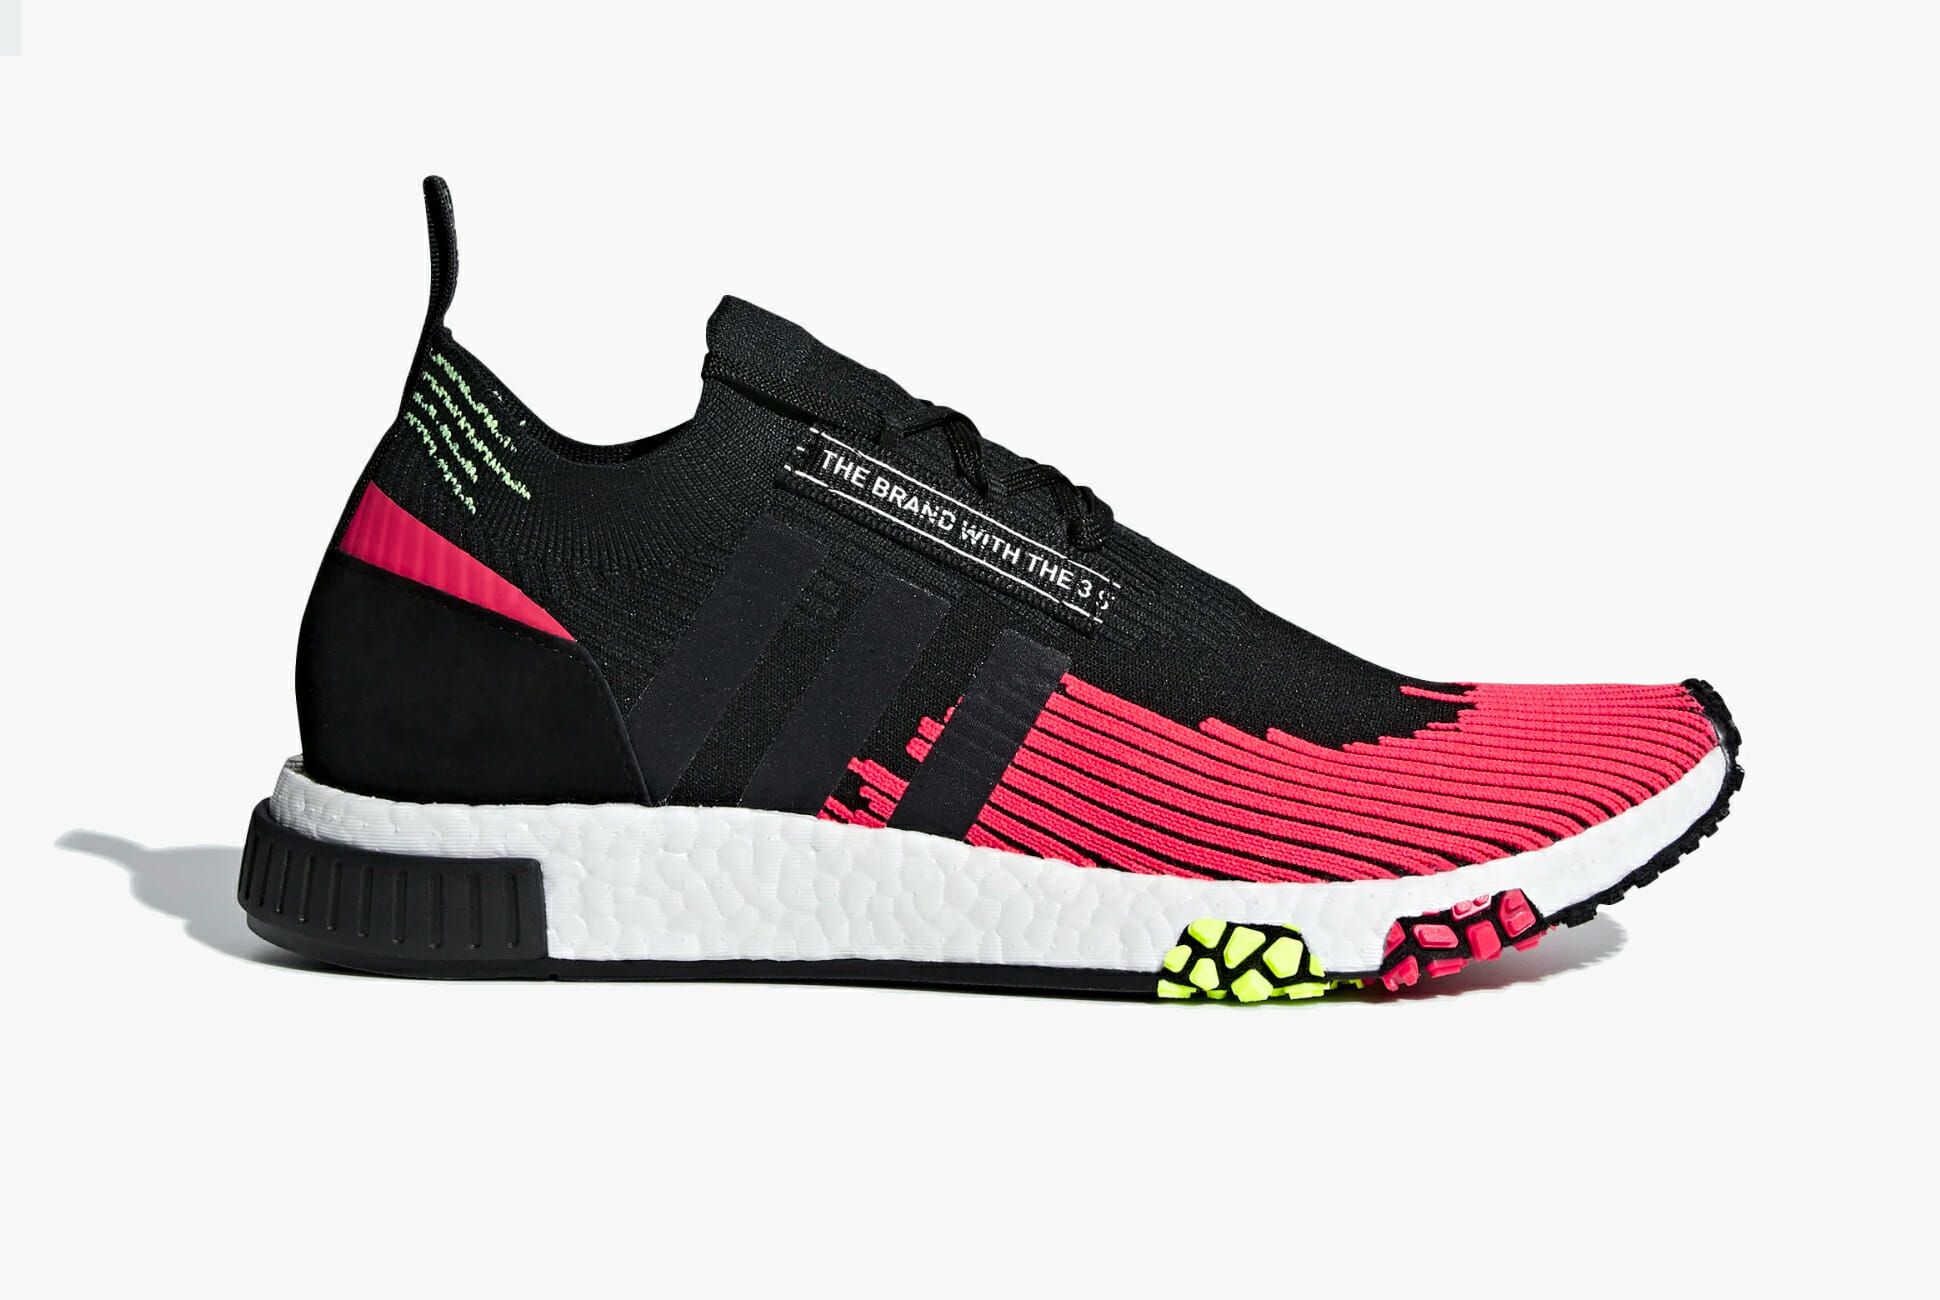 nmd_racer shoes